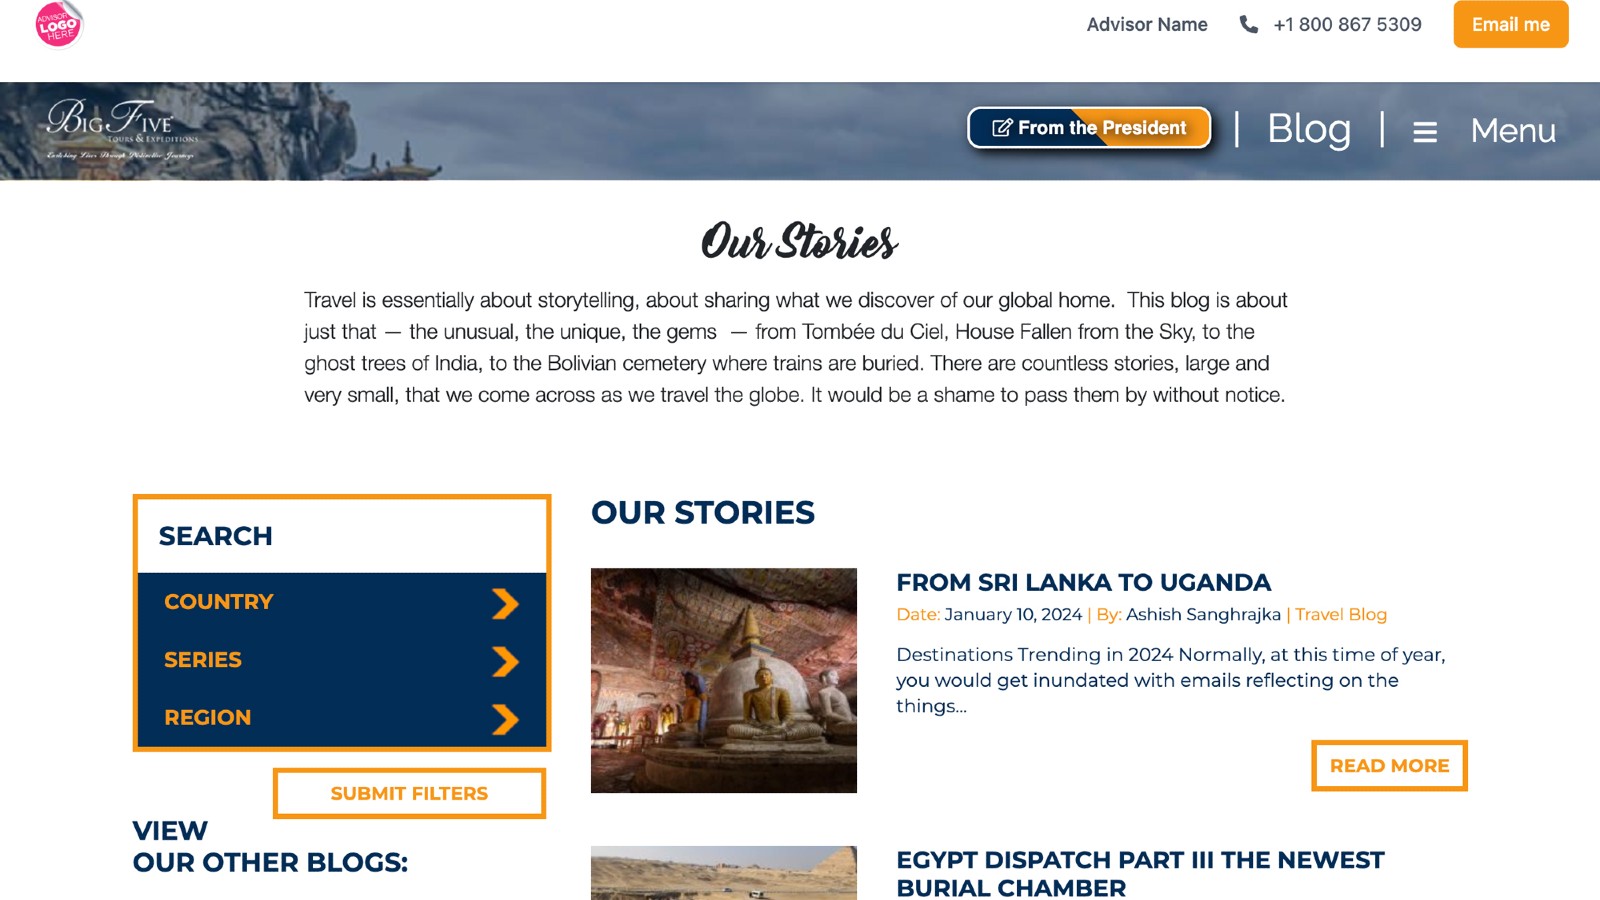 BigFiveApproach GuidesCobranded Website